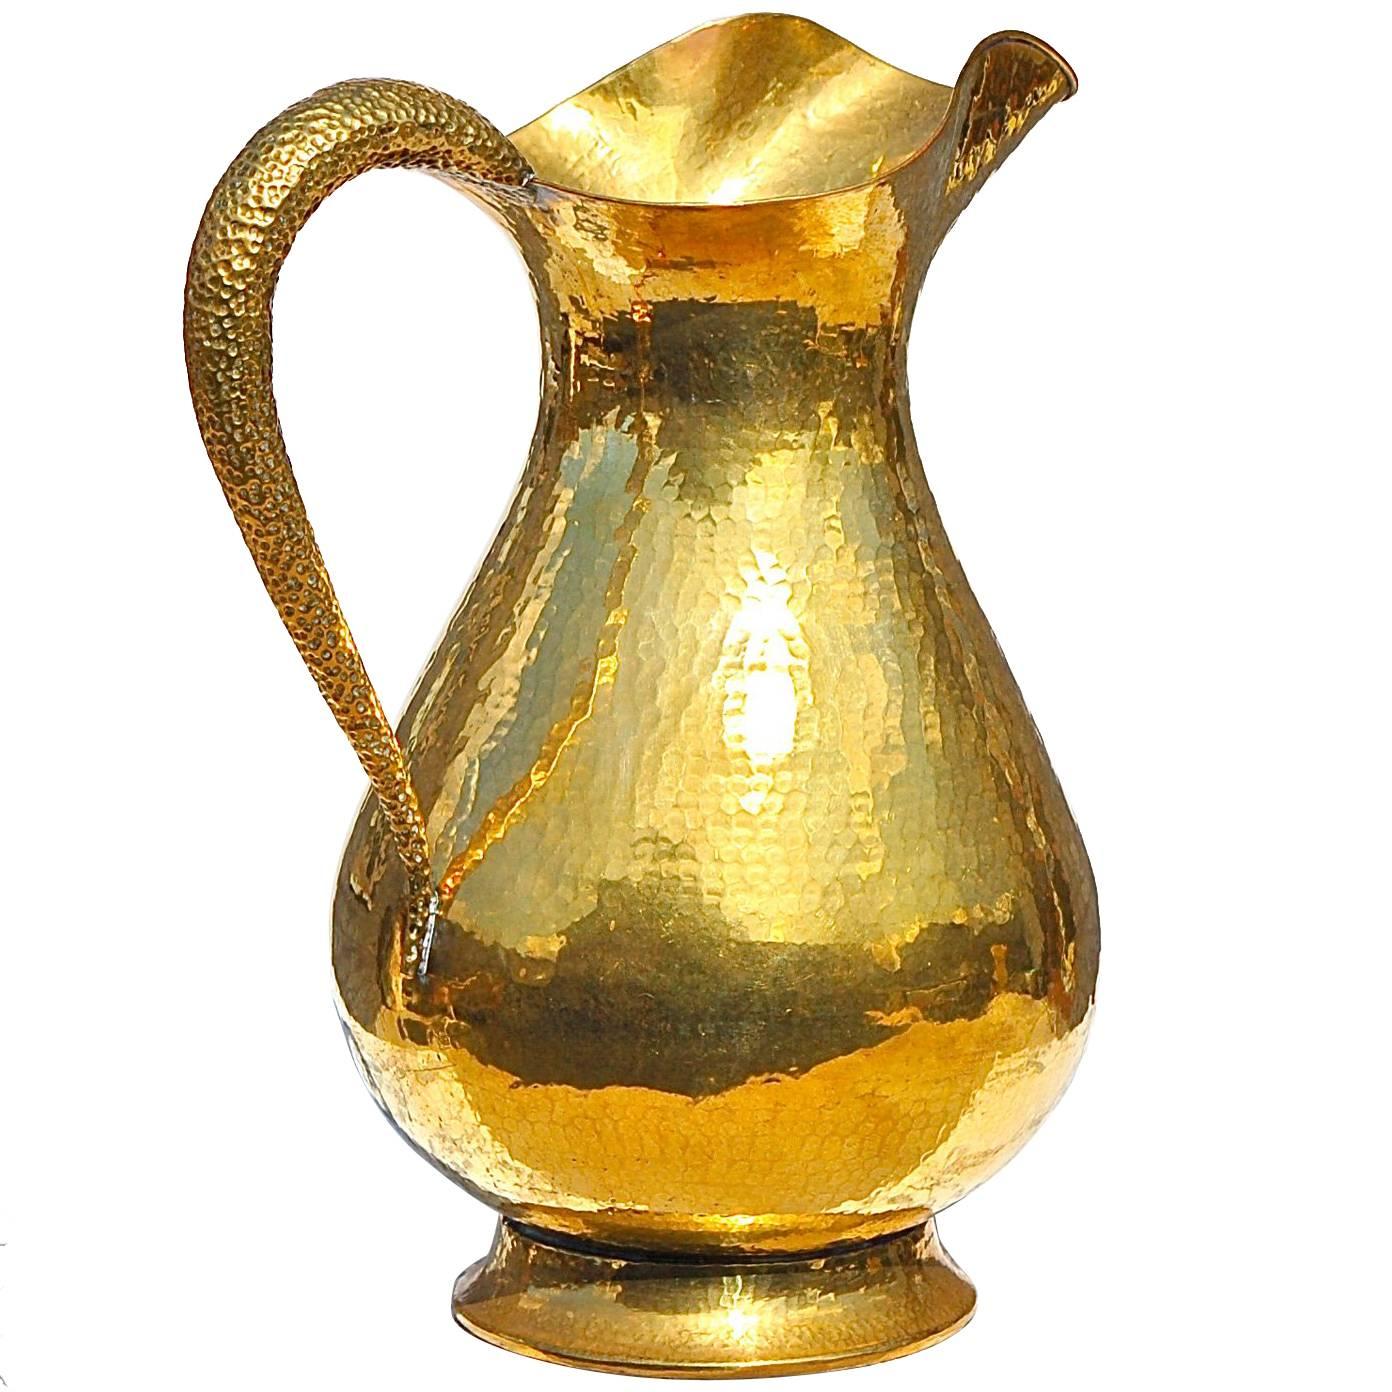 Oversized Hammered Brass Vase or Umbrella Stand in Shape of Jug, Italy, 1950s For Sale